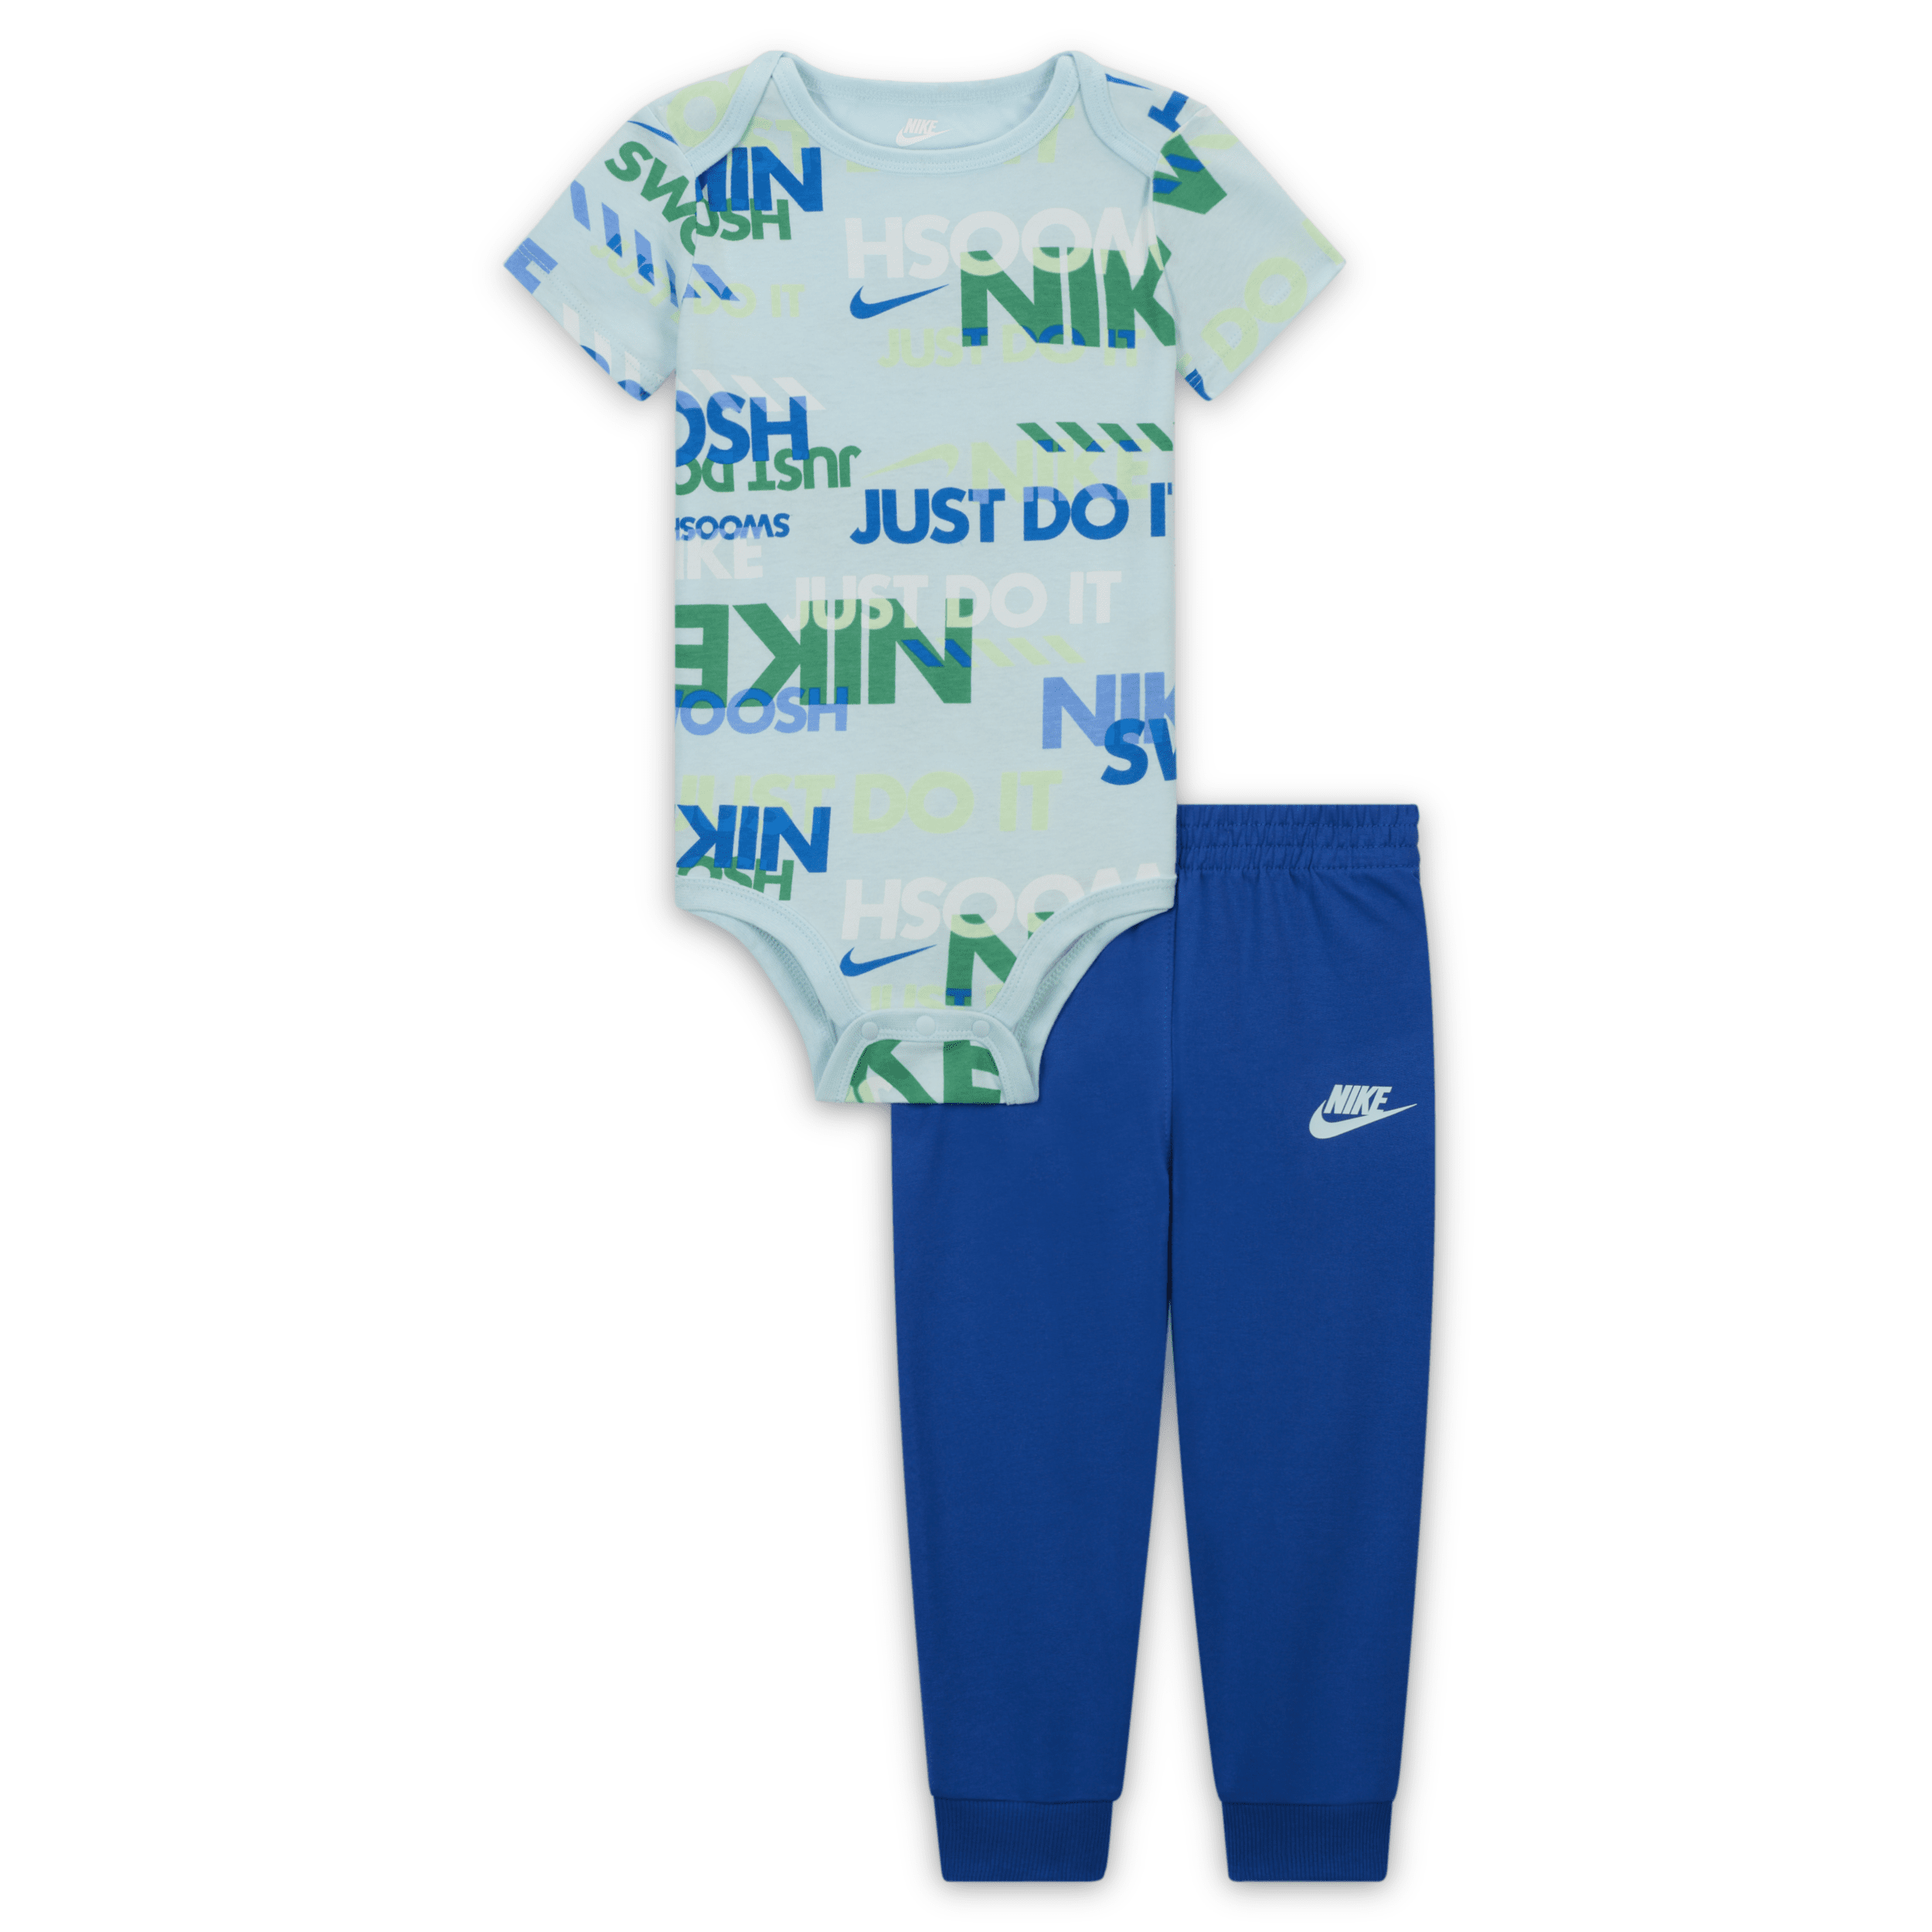 Nike Sportswear Playful Exploration Baby (12-24m) Printed Bodysuit And Pants Set In Blue